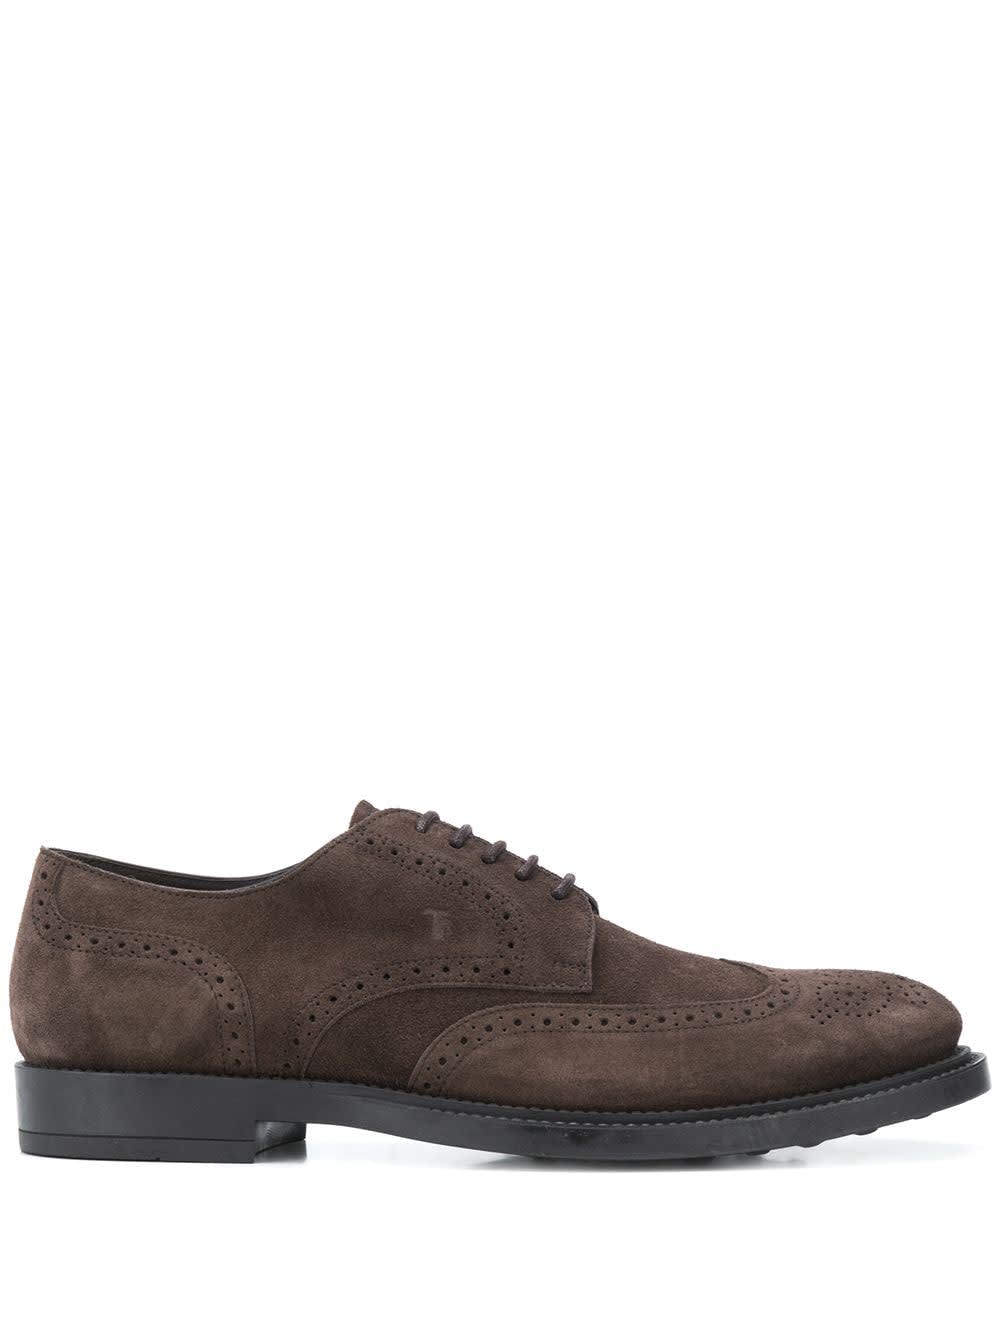 TOD'S 62C FORMAL DERBY SHOES